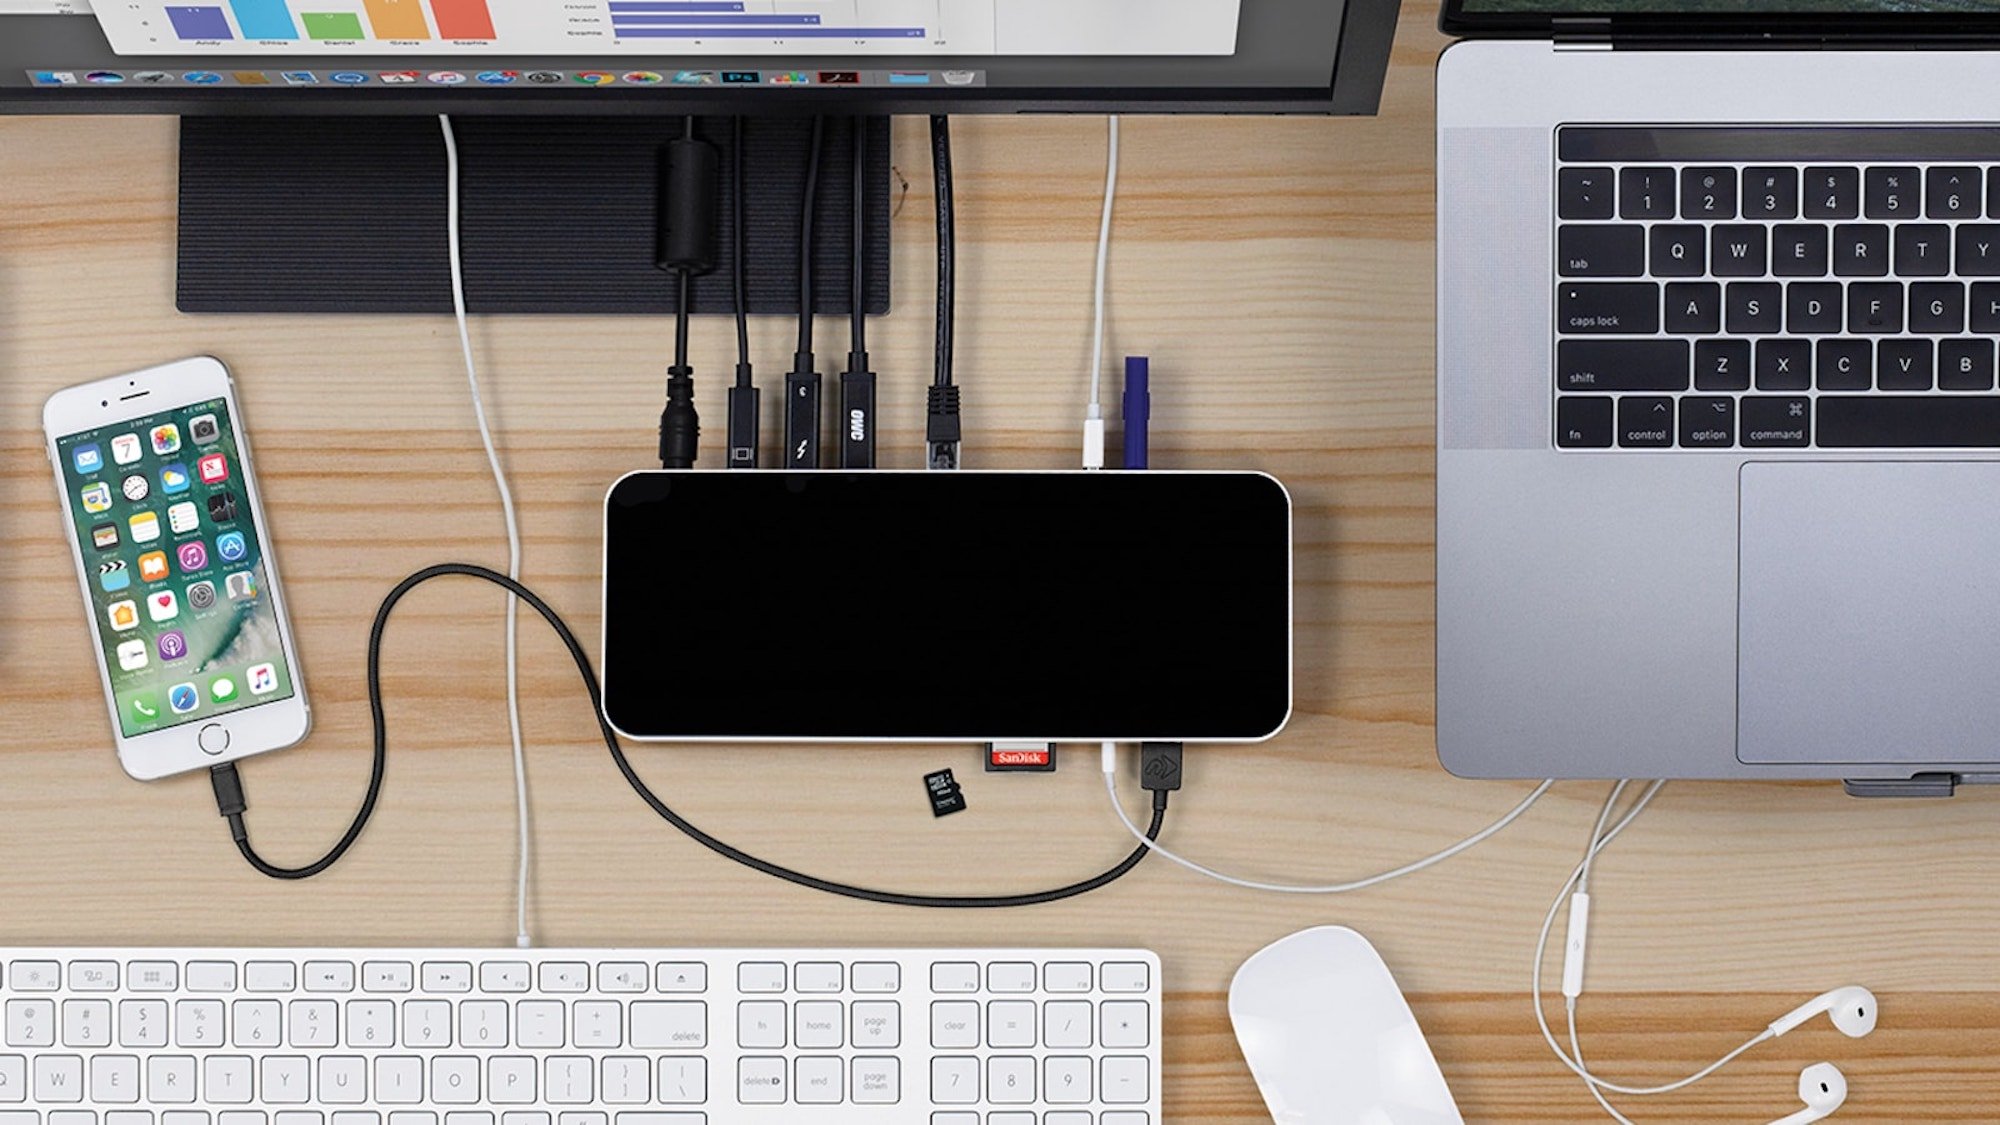 This new Thunderbolt 3 dock has all the ports you need to work better